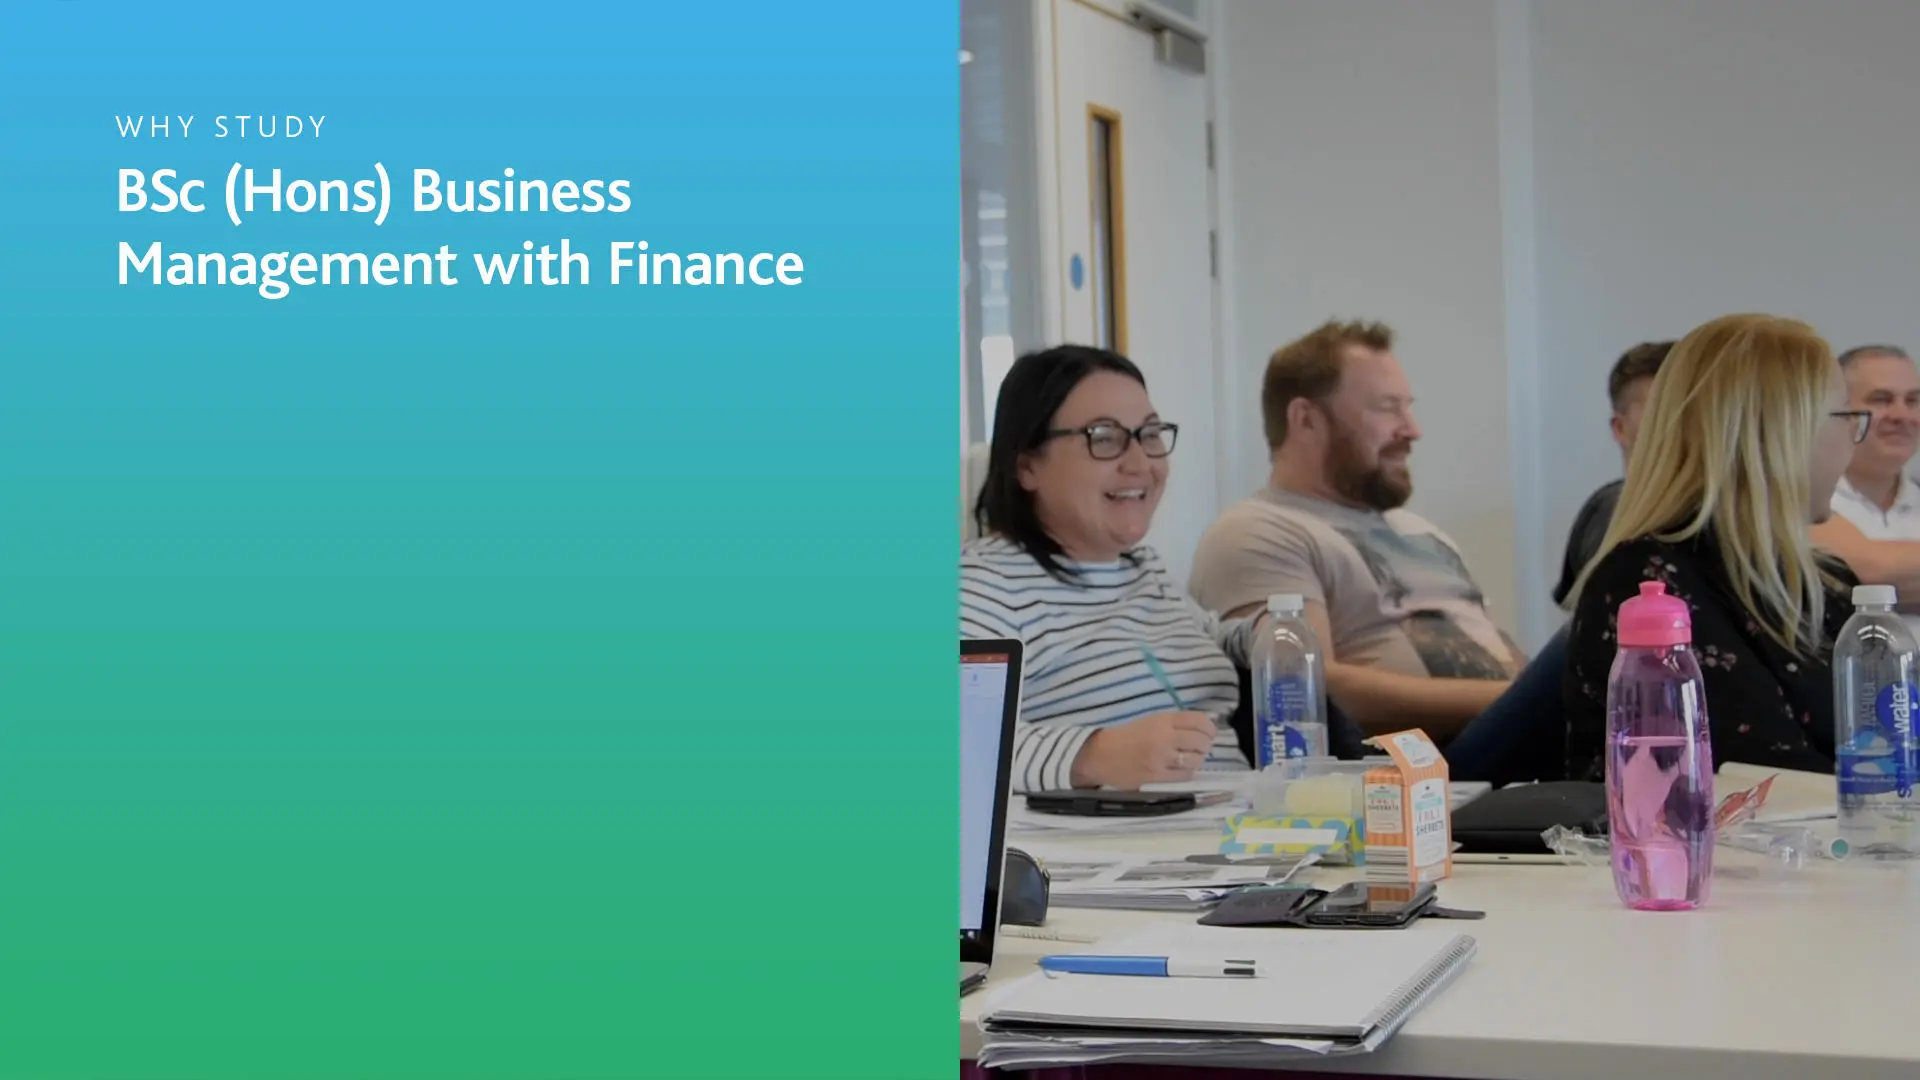 Image of students in a classroom laughing, with words on the side that say; 'Why study BSc (Hons) Business Management with Finance